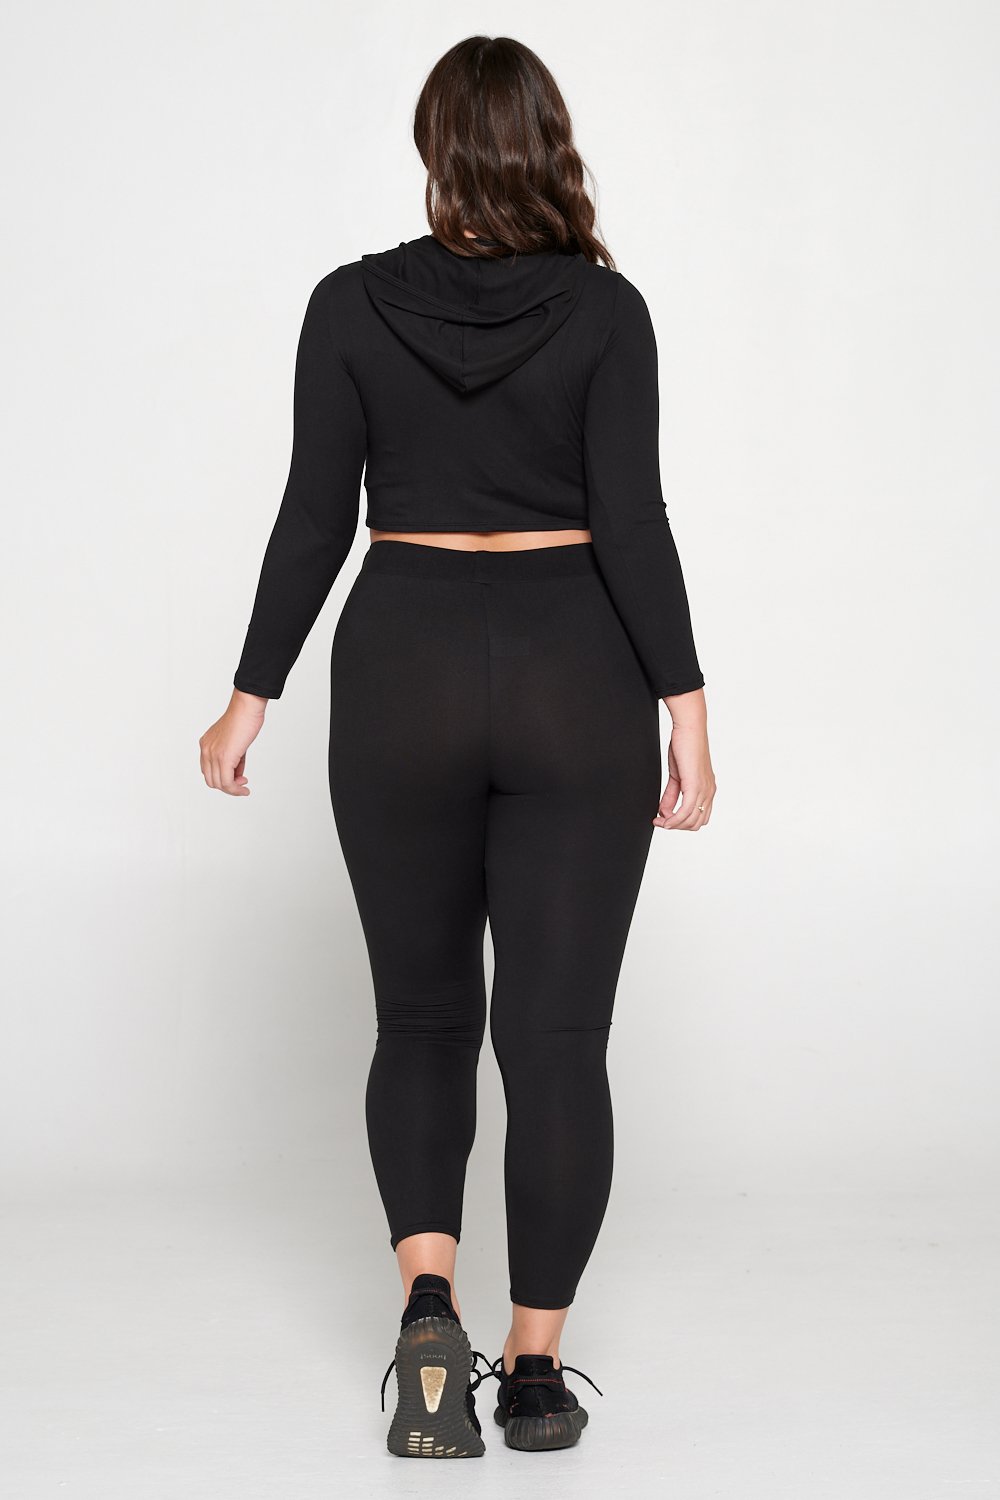 livd L I V D women's contemporary plus size  scoop neck crop hoodie and elastic band sweatpant with faux drawstring in black